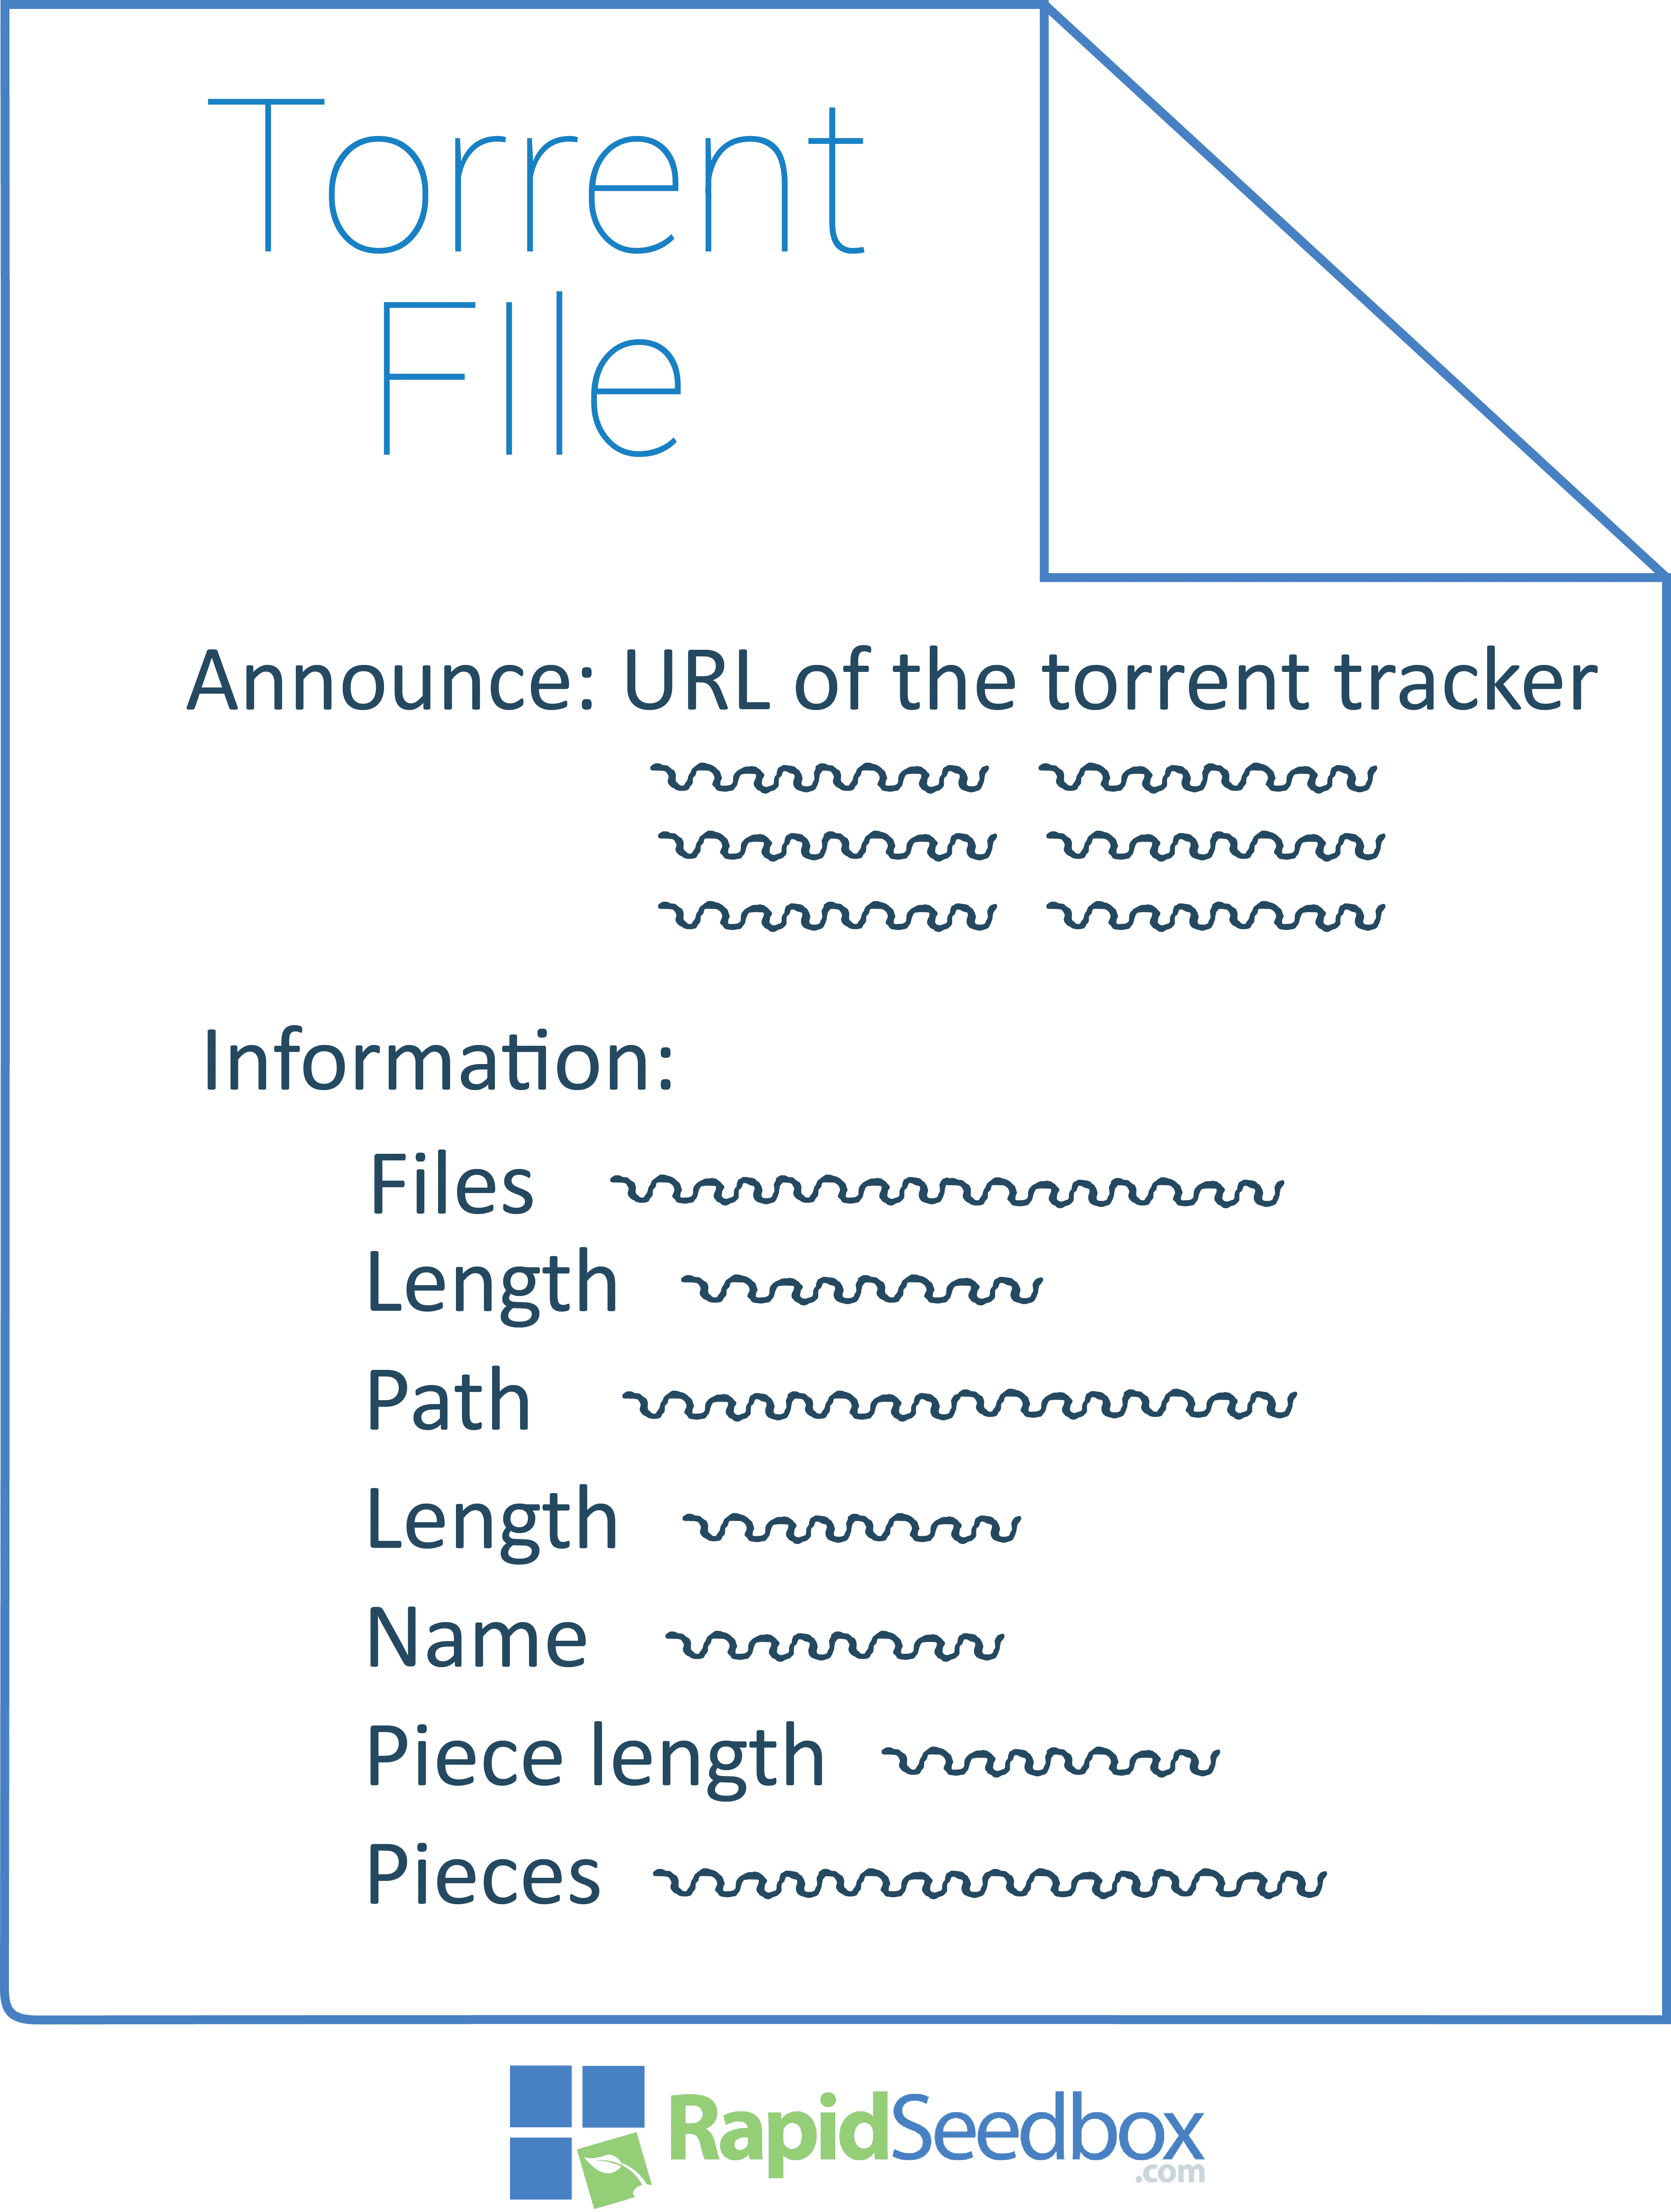 Downloading your First Torrent: The Definitive Guide (2020 Update)